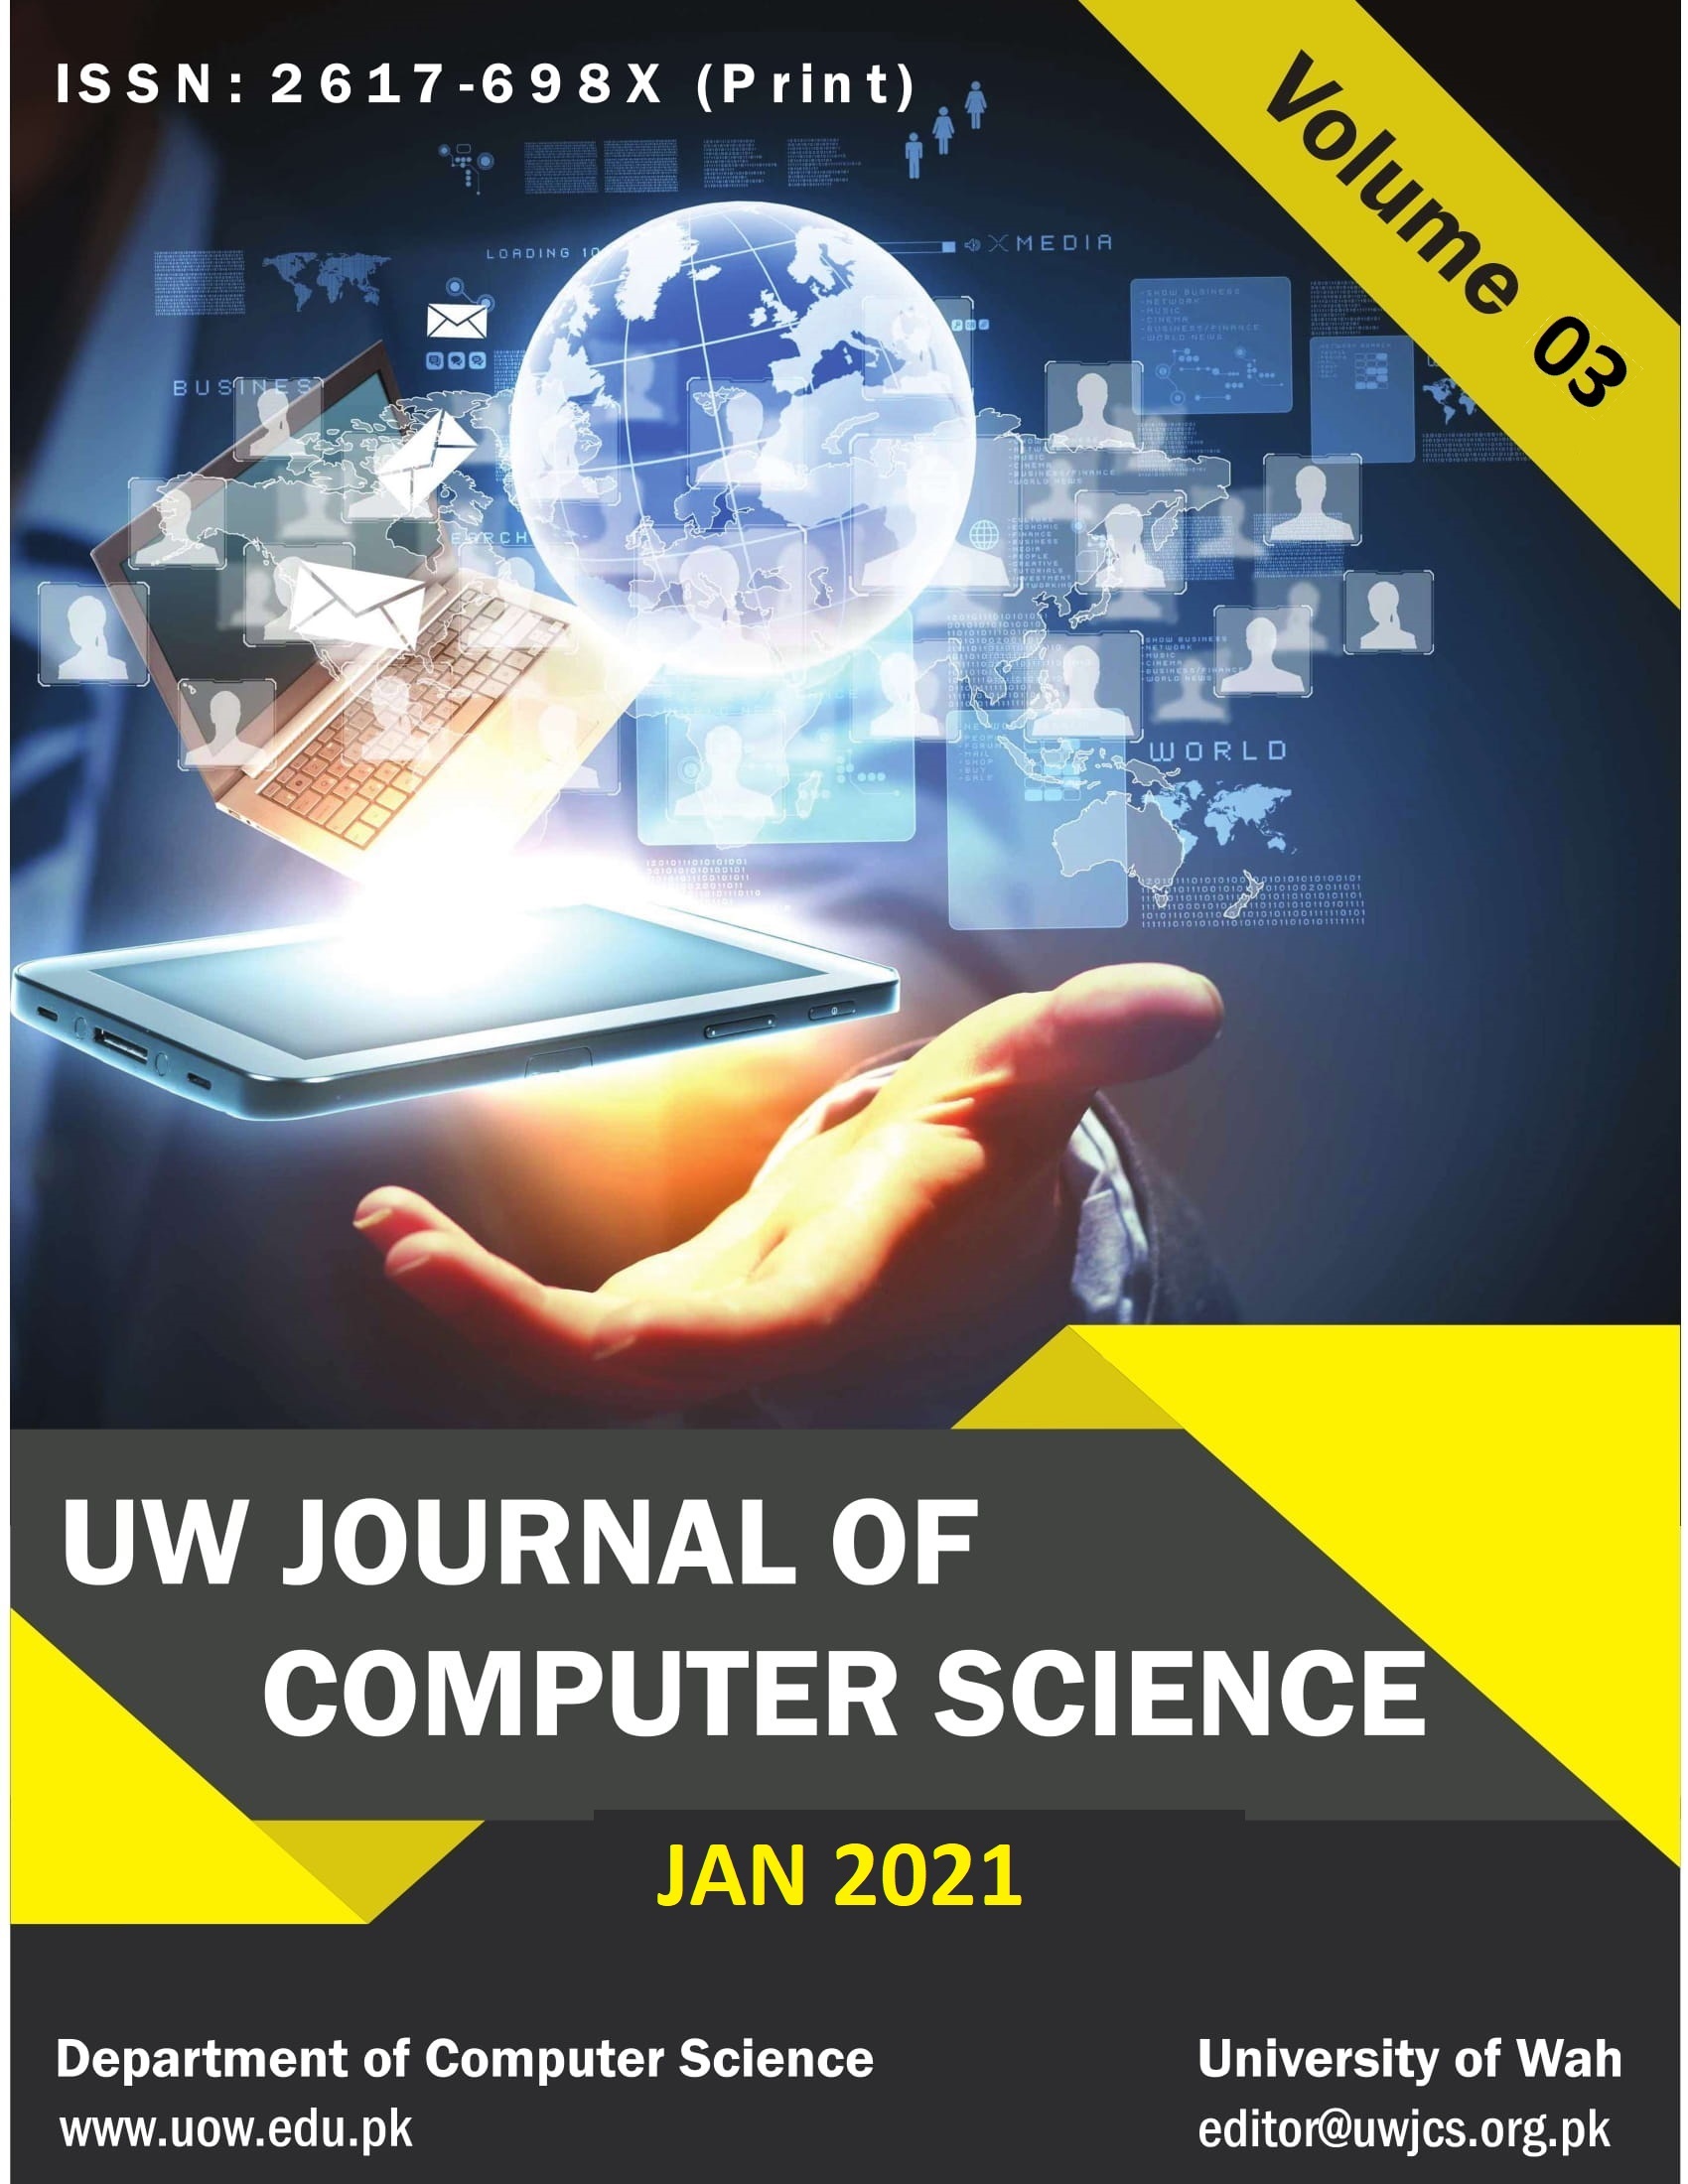 					View Vol. 3 No. 1 (2021): University of Wah Journal of Computer Science
				